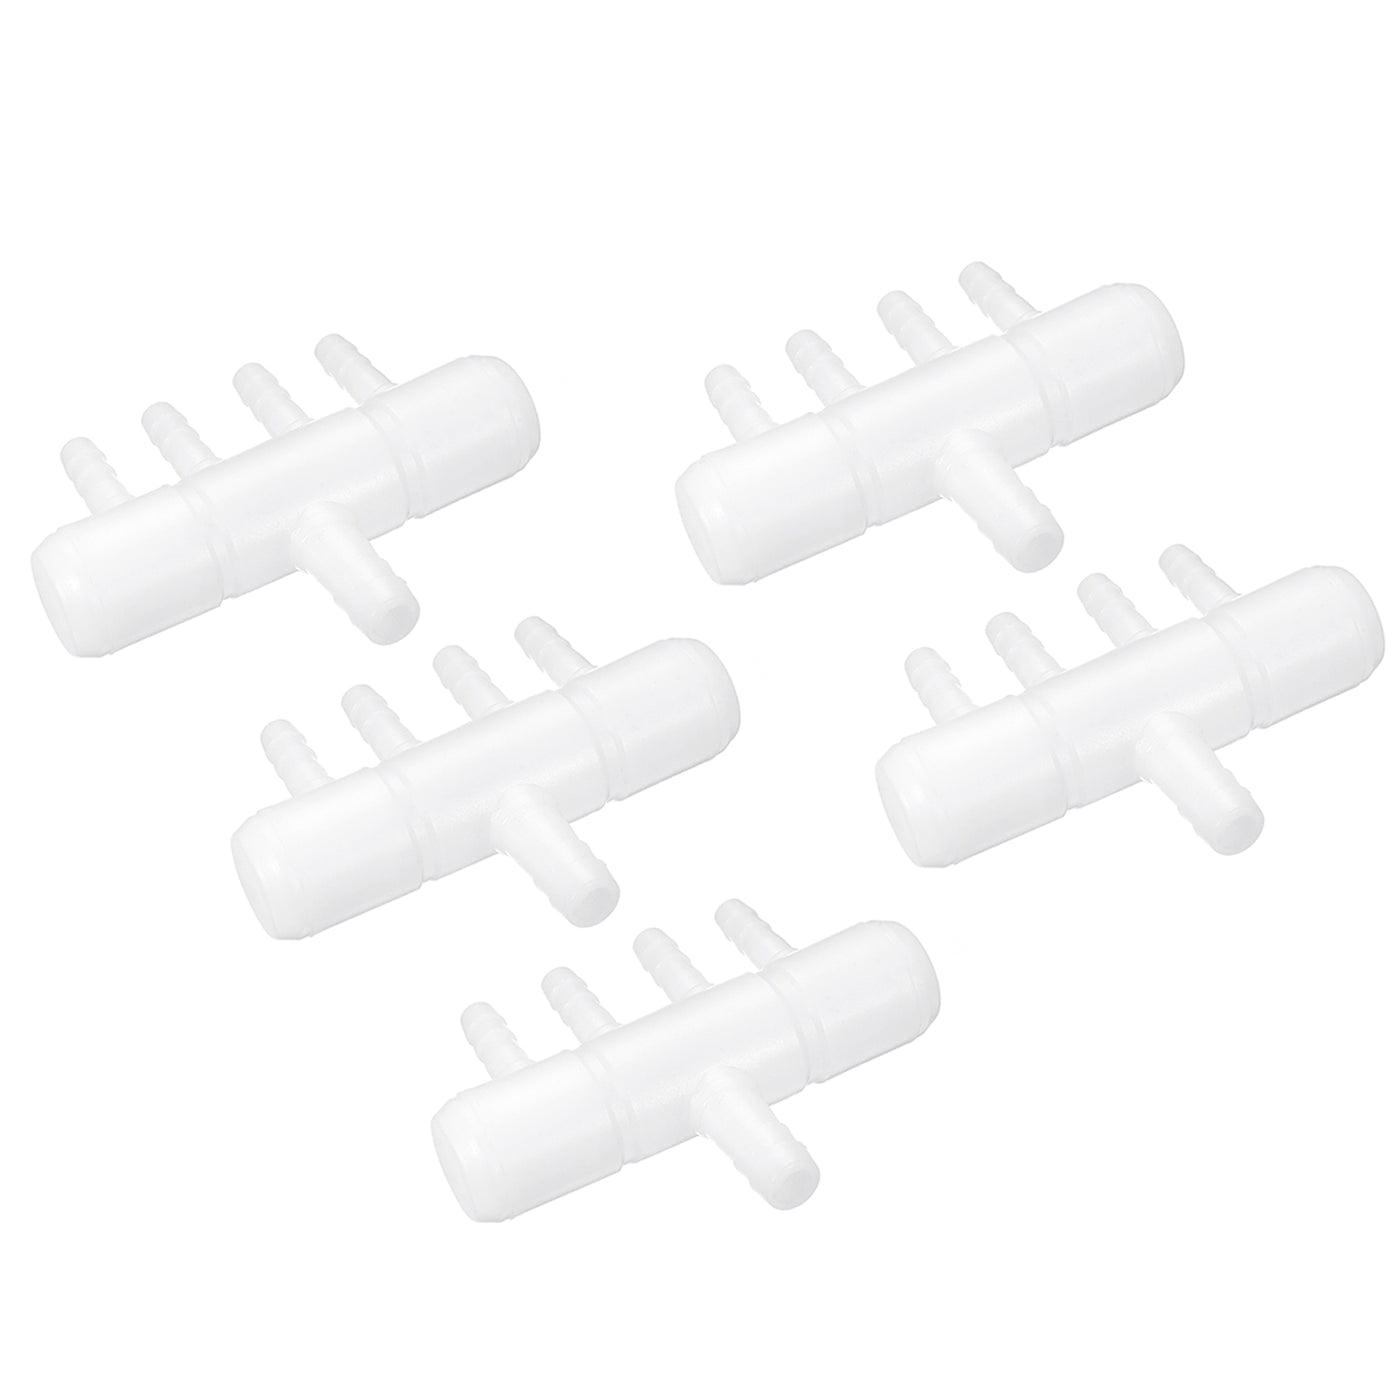 uxcell Uxcell Air Line Tubing Splitter Connector, 5Pcs 8mm/0.31" to 5mm/0.2" 4 Way, White